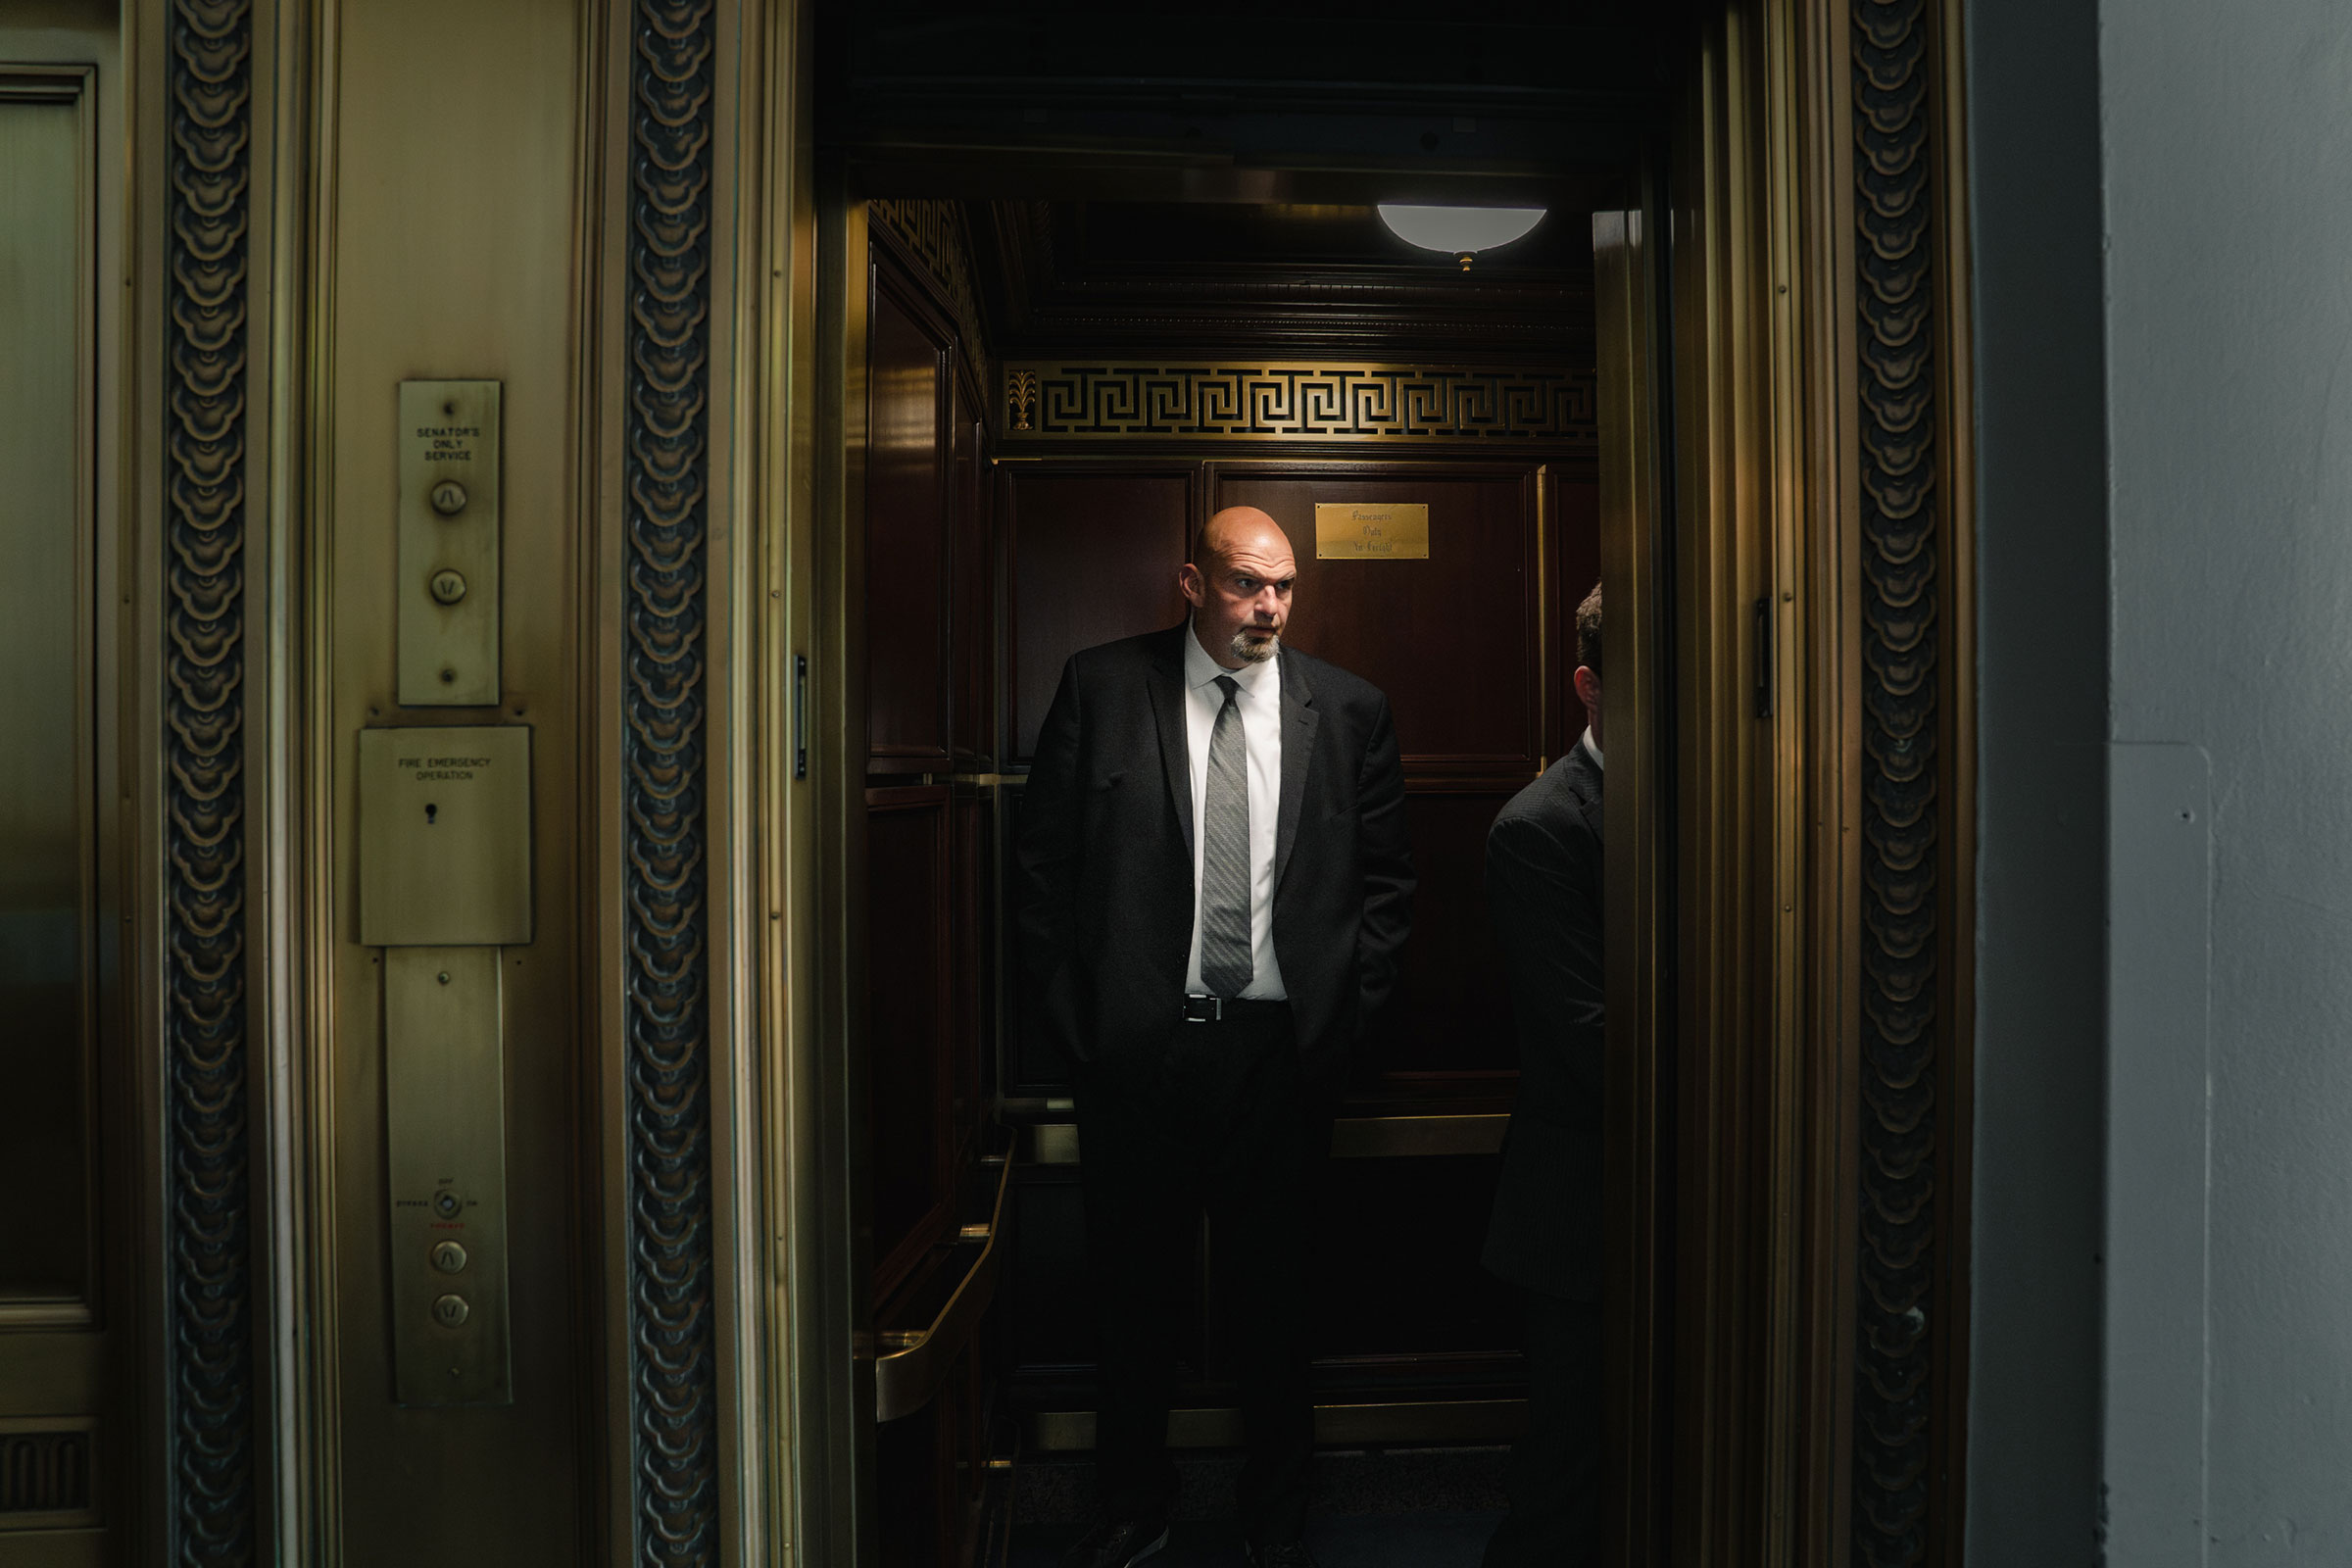 Fetterman takes the elevator before heading to a Senate vote on Capitol Hill (Shuran Huang for TIME)